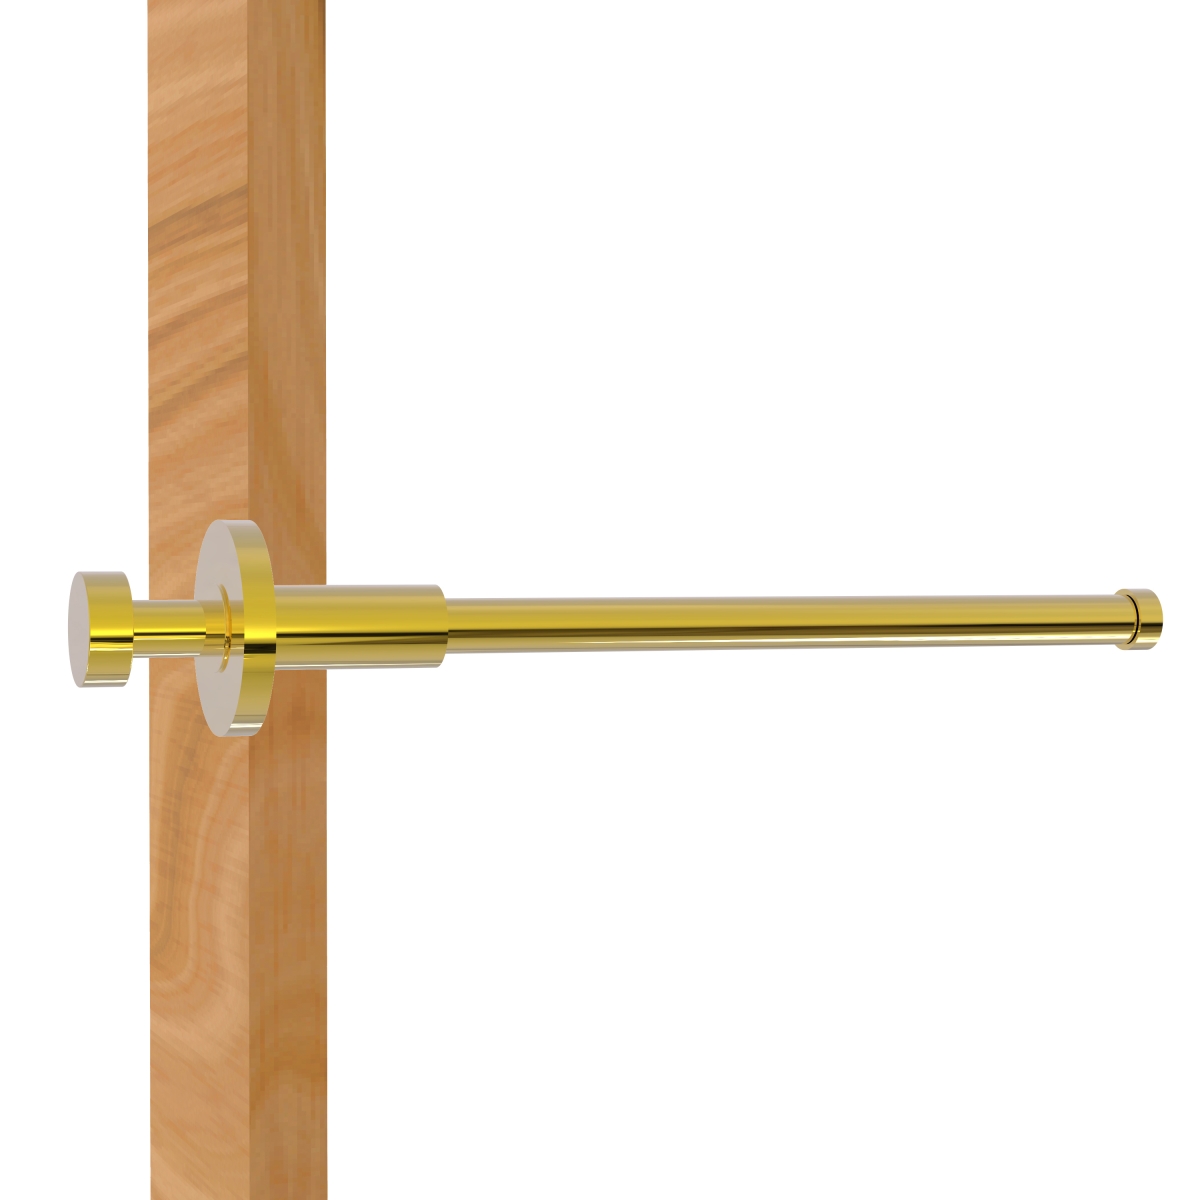 Fr-23-unl Fresno Collection Retractable Pullout Garment Rod, Unlacquered Brass